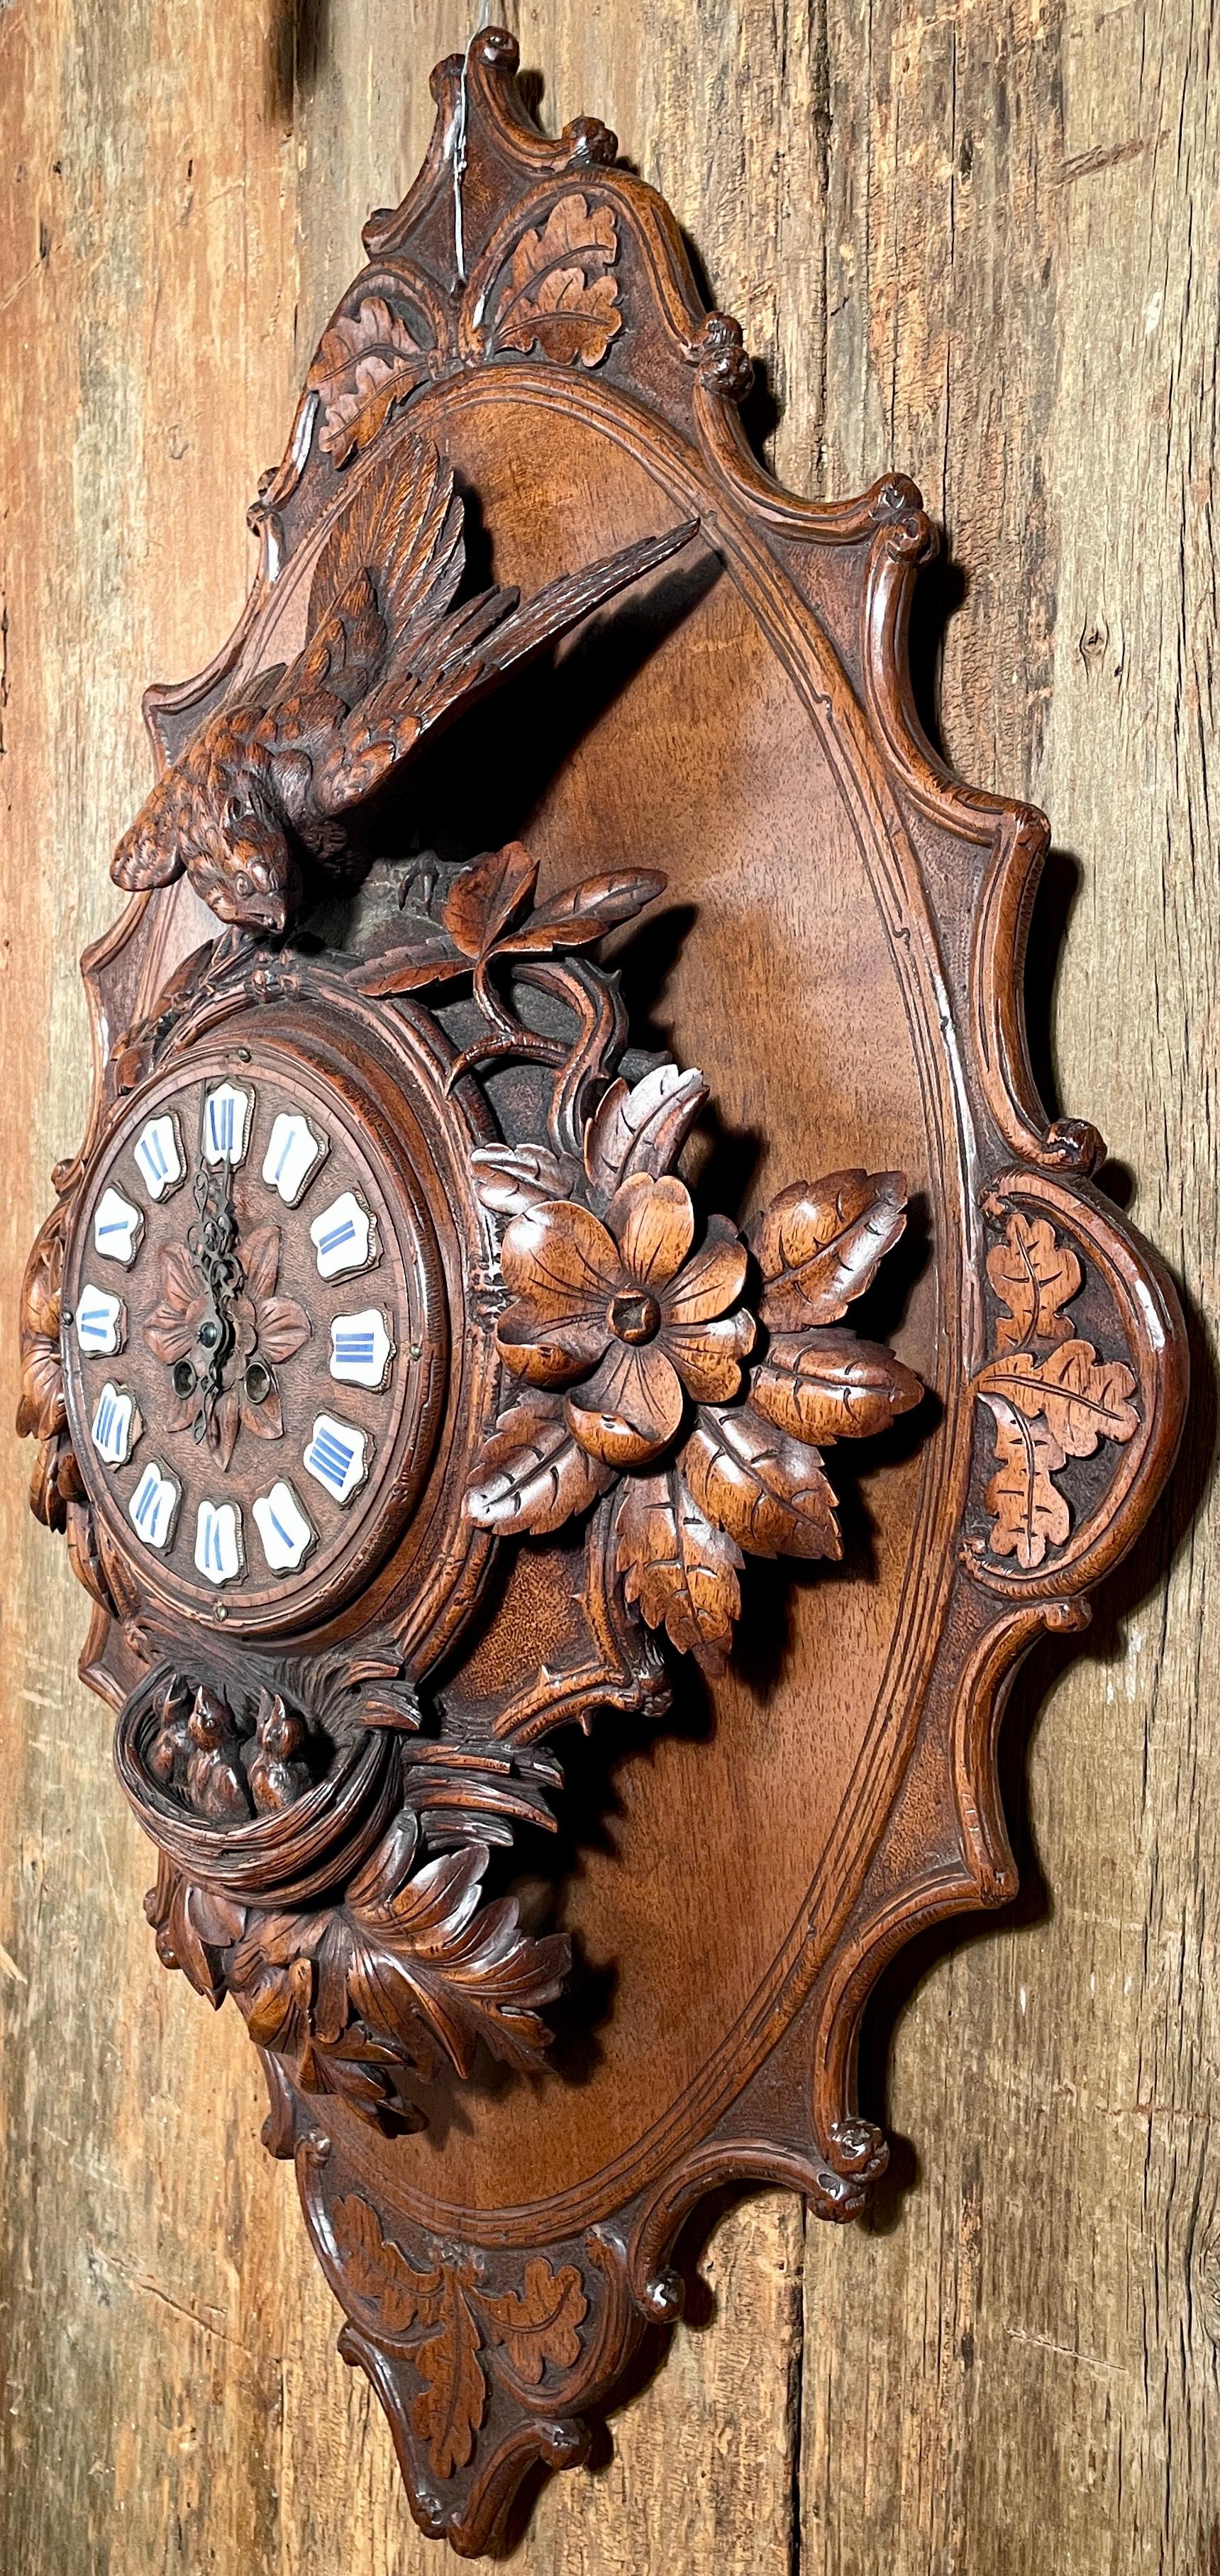 Antique German Black Forest Wall Clock with Carved Bird and Florals, Circa 1880.